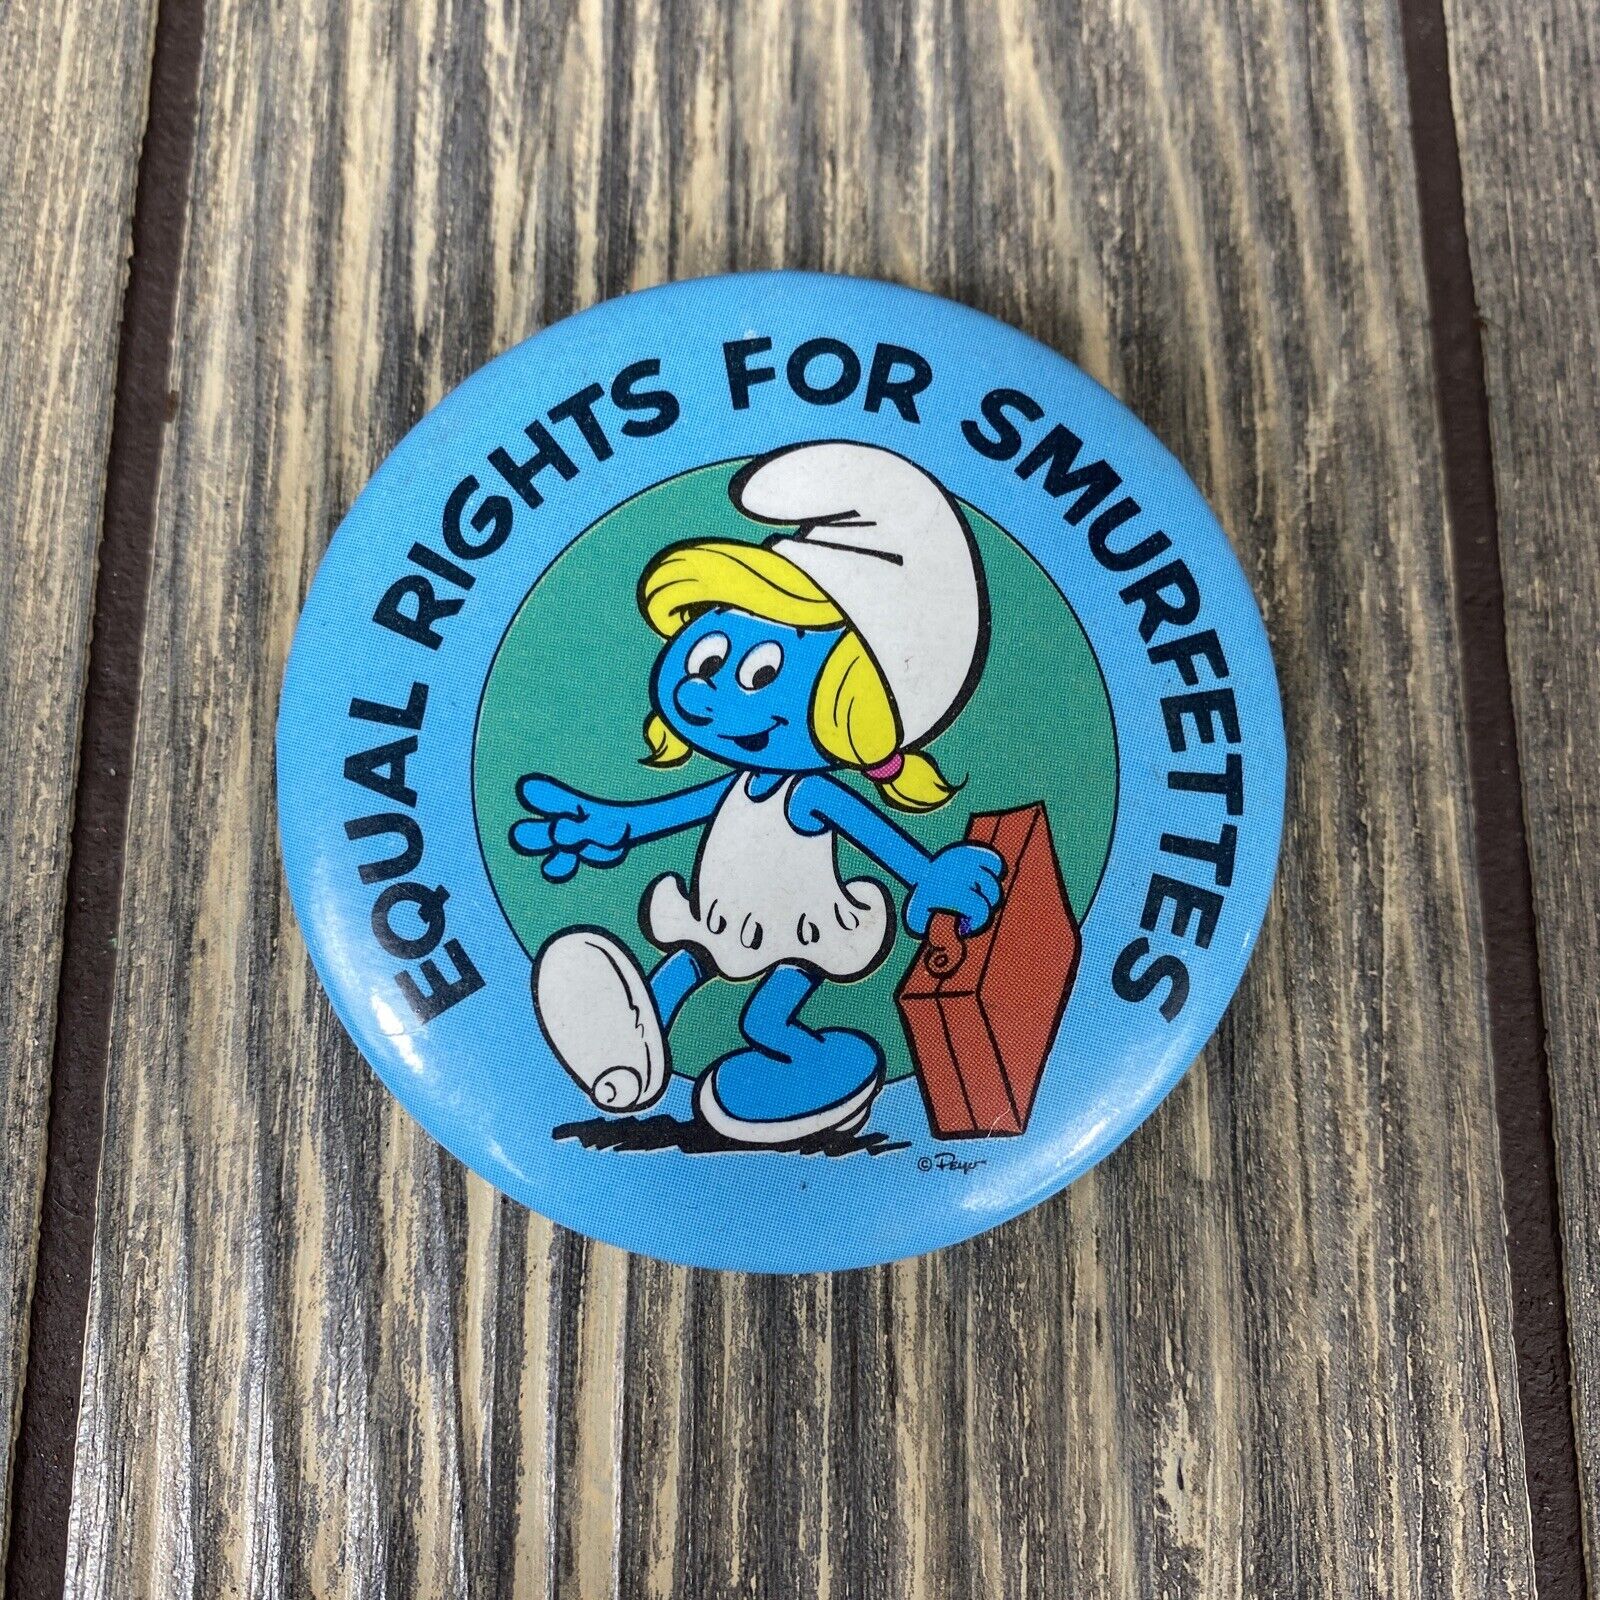 Vintage 1980 Equal Rights For Smurfettes Shirt Pin 2”